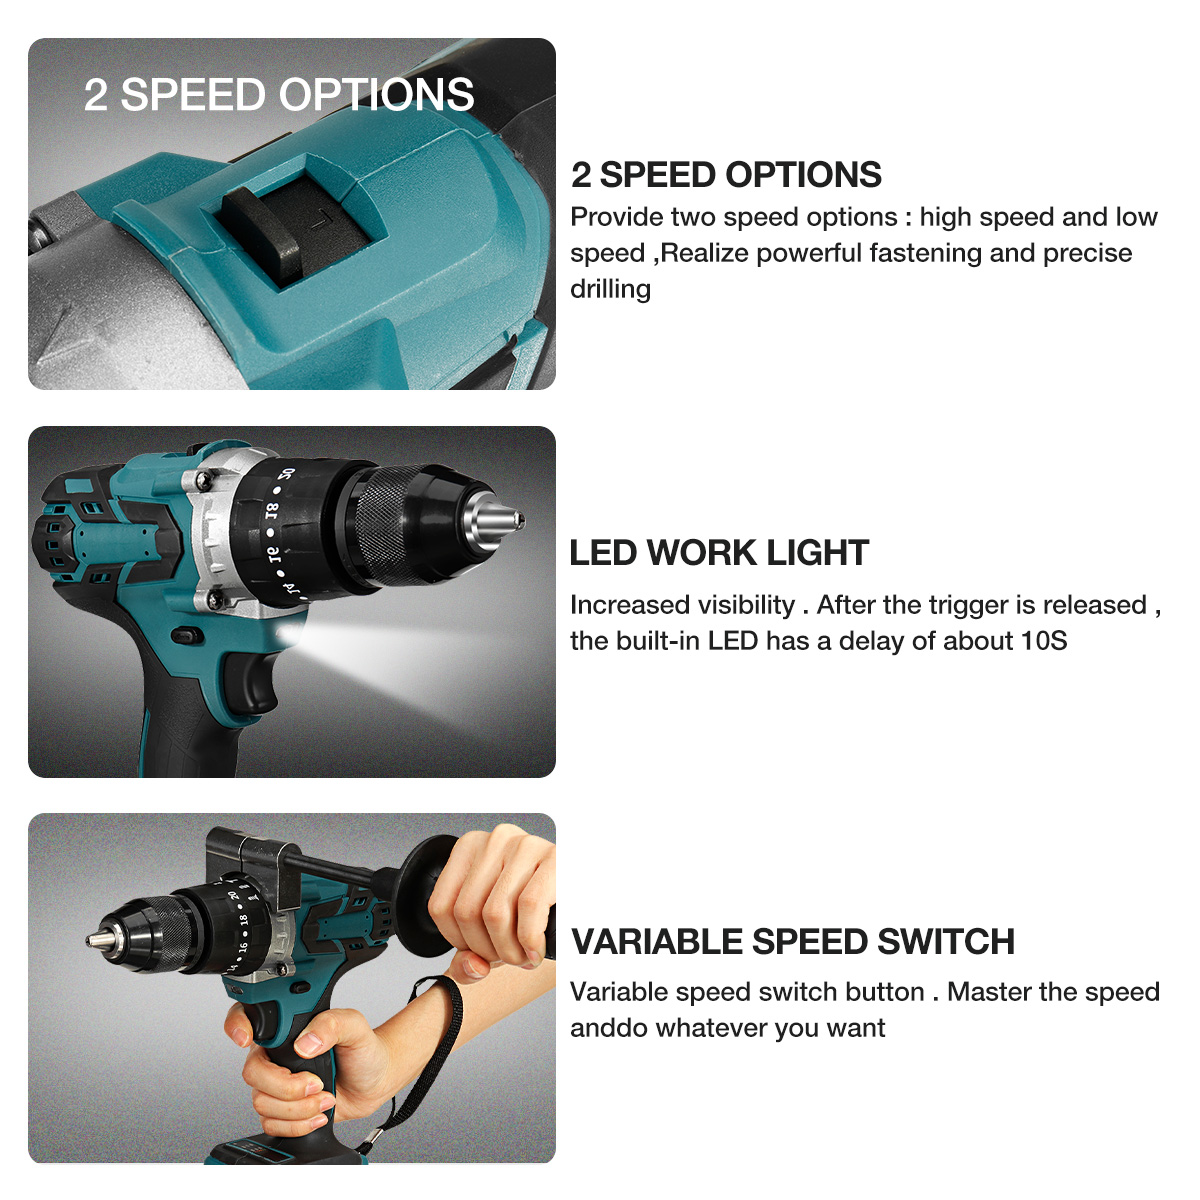 Cordless-Electric-Impact-Drill-3-in-1-Rechargeable-Drill-Screwdriver-13mm-Chuck-W-1-or-2-Li-ion-Batt-1803323-8